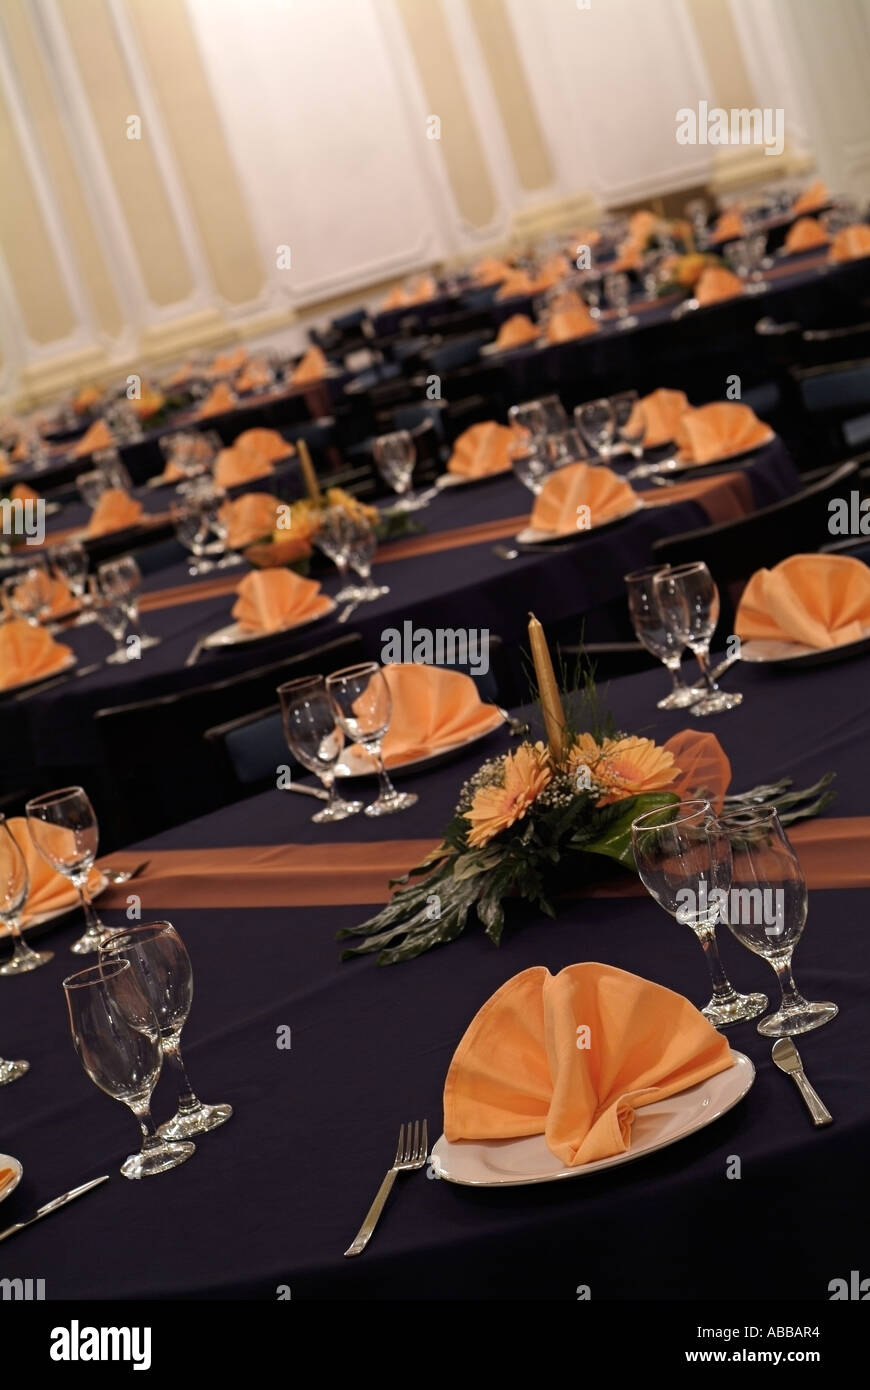 Tables Laid Out Ready for a Banquet Stock Photo